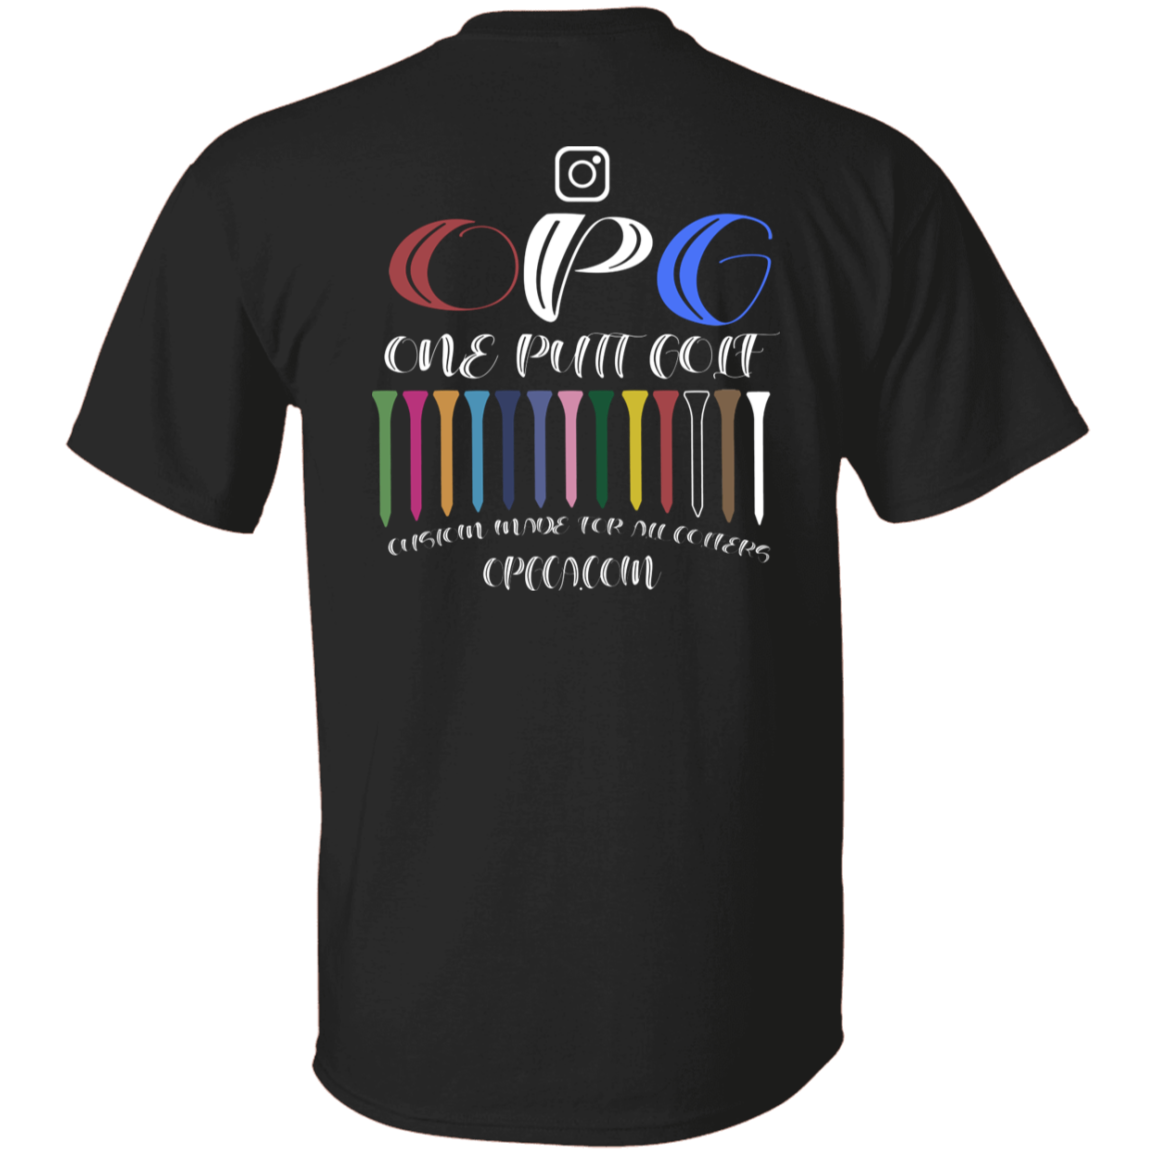 OPG Custom Design #6. Driveristee & Inclusion. Youth 100% Cotton T-Shirt